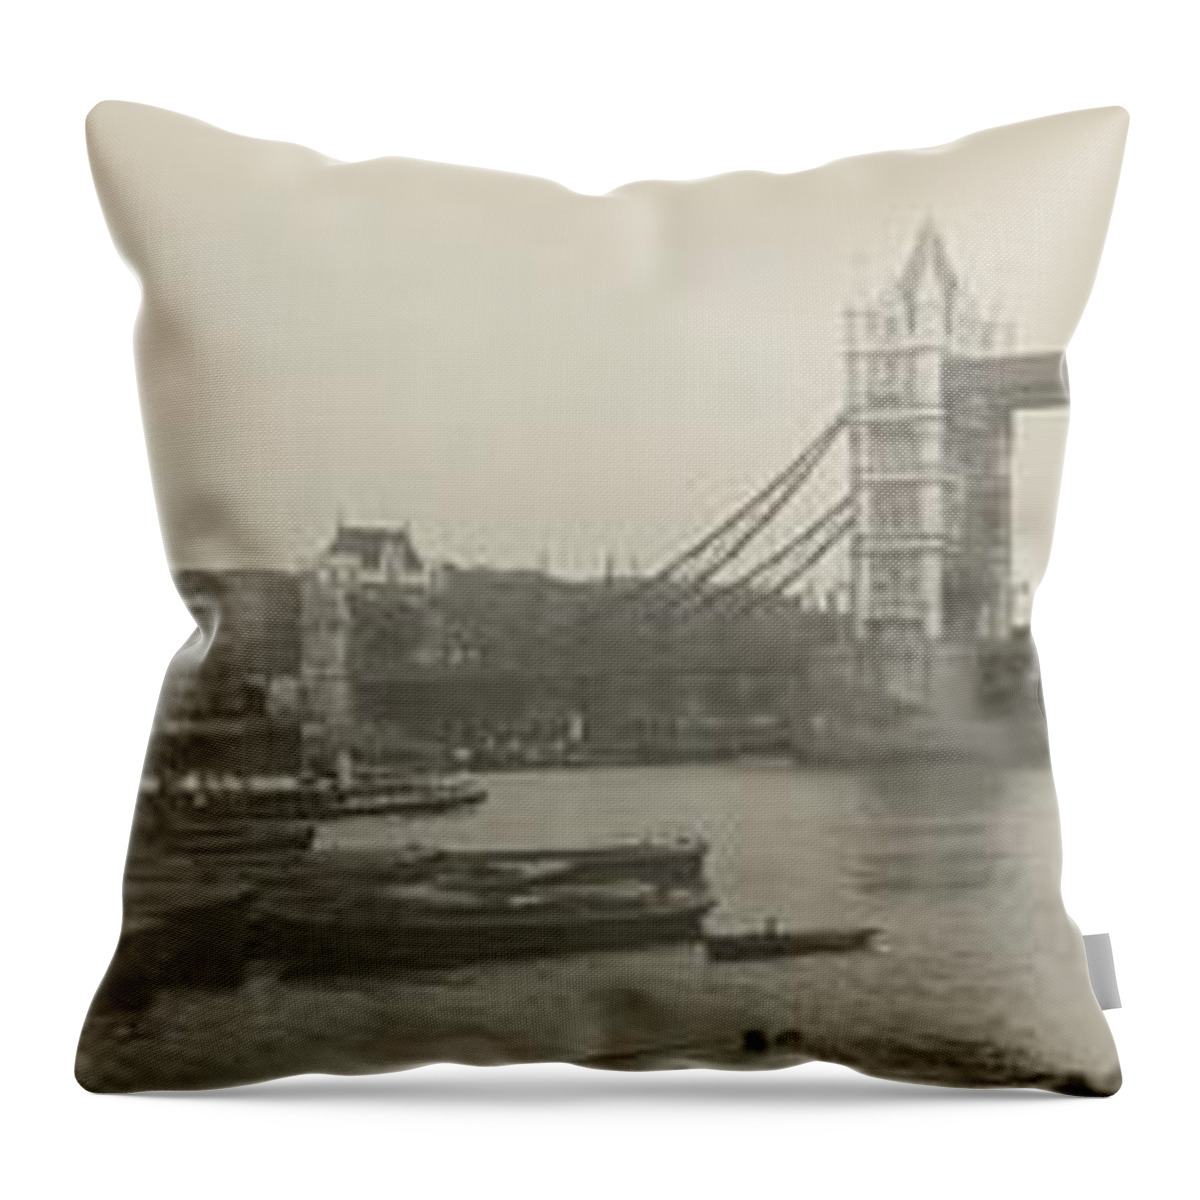 Richard Reeve Throw Pillow featuring the photograph The Thames at Tower Bridge 1909 by Richard Reeve